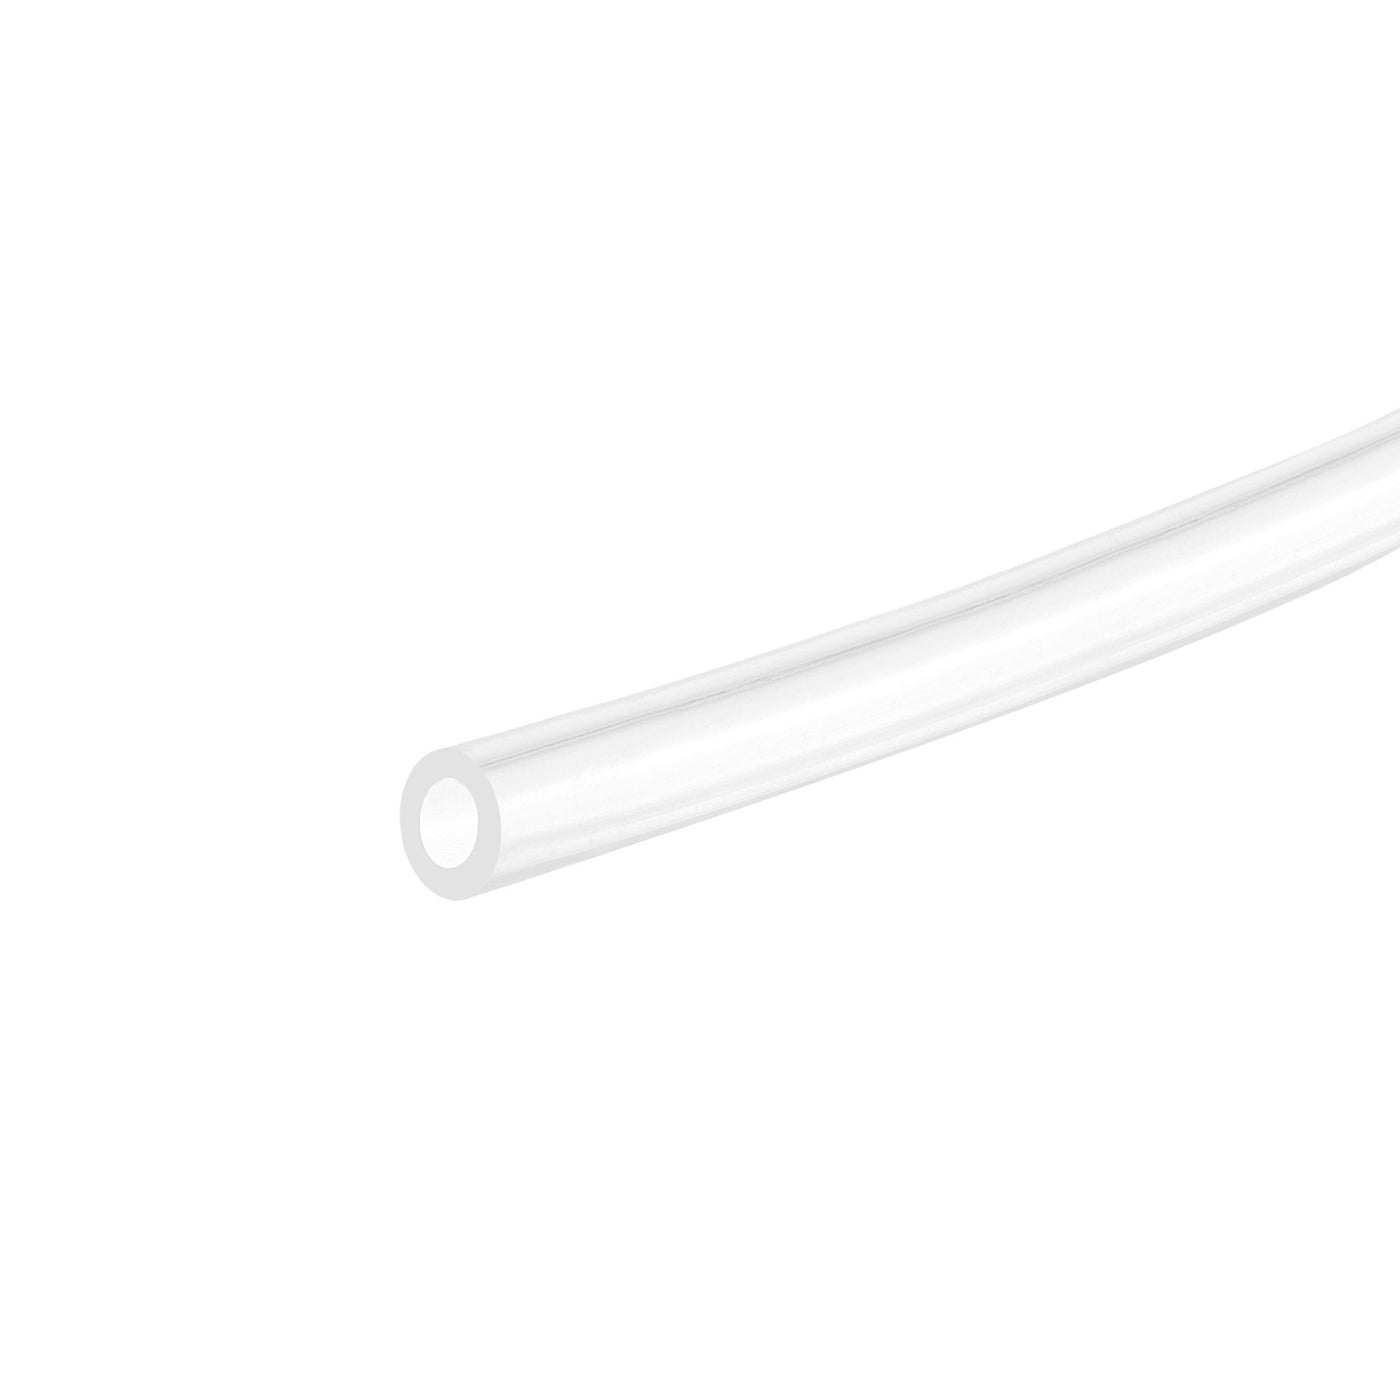 Uxcell Uxcell Clear Silicone Tubing, 5/32"(4mm) ID 9/32"(7mm) OD 1/16" Wall 20ft, Flexible Silicone Tube for Air Water Pipe Pump Transfer